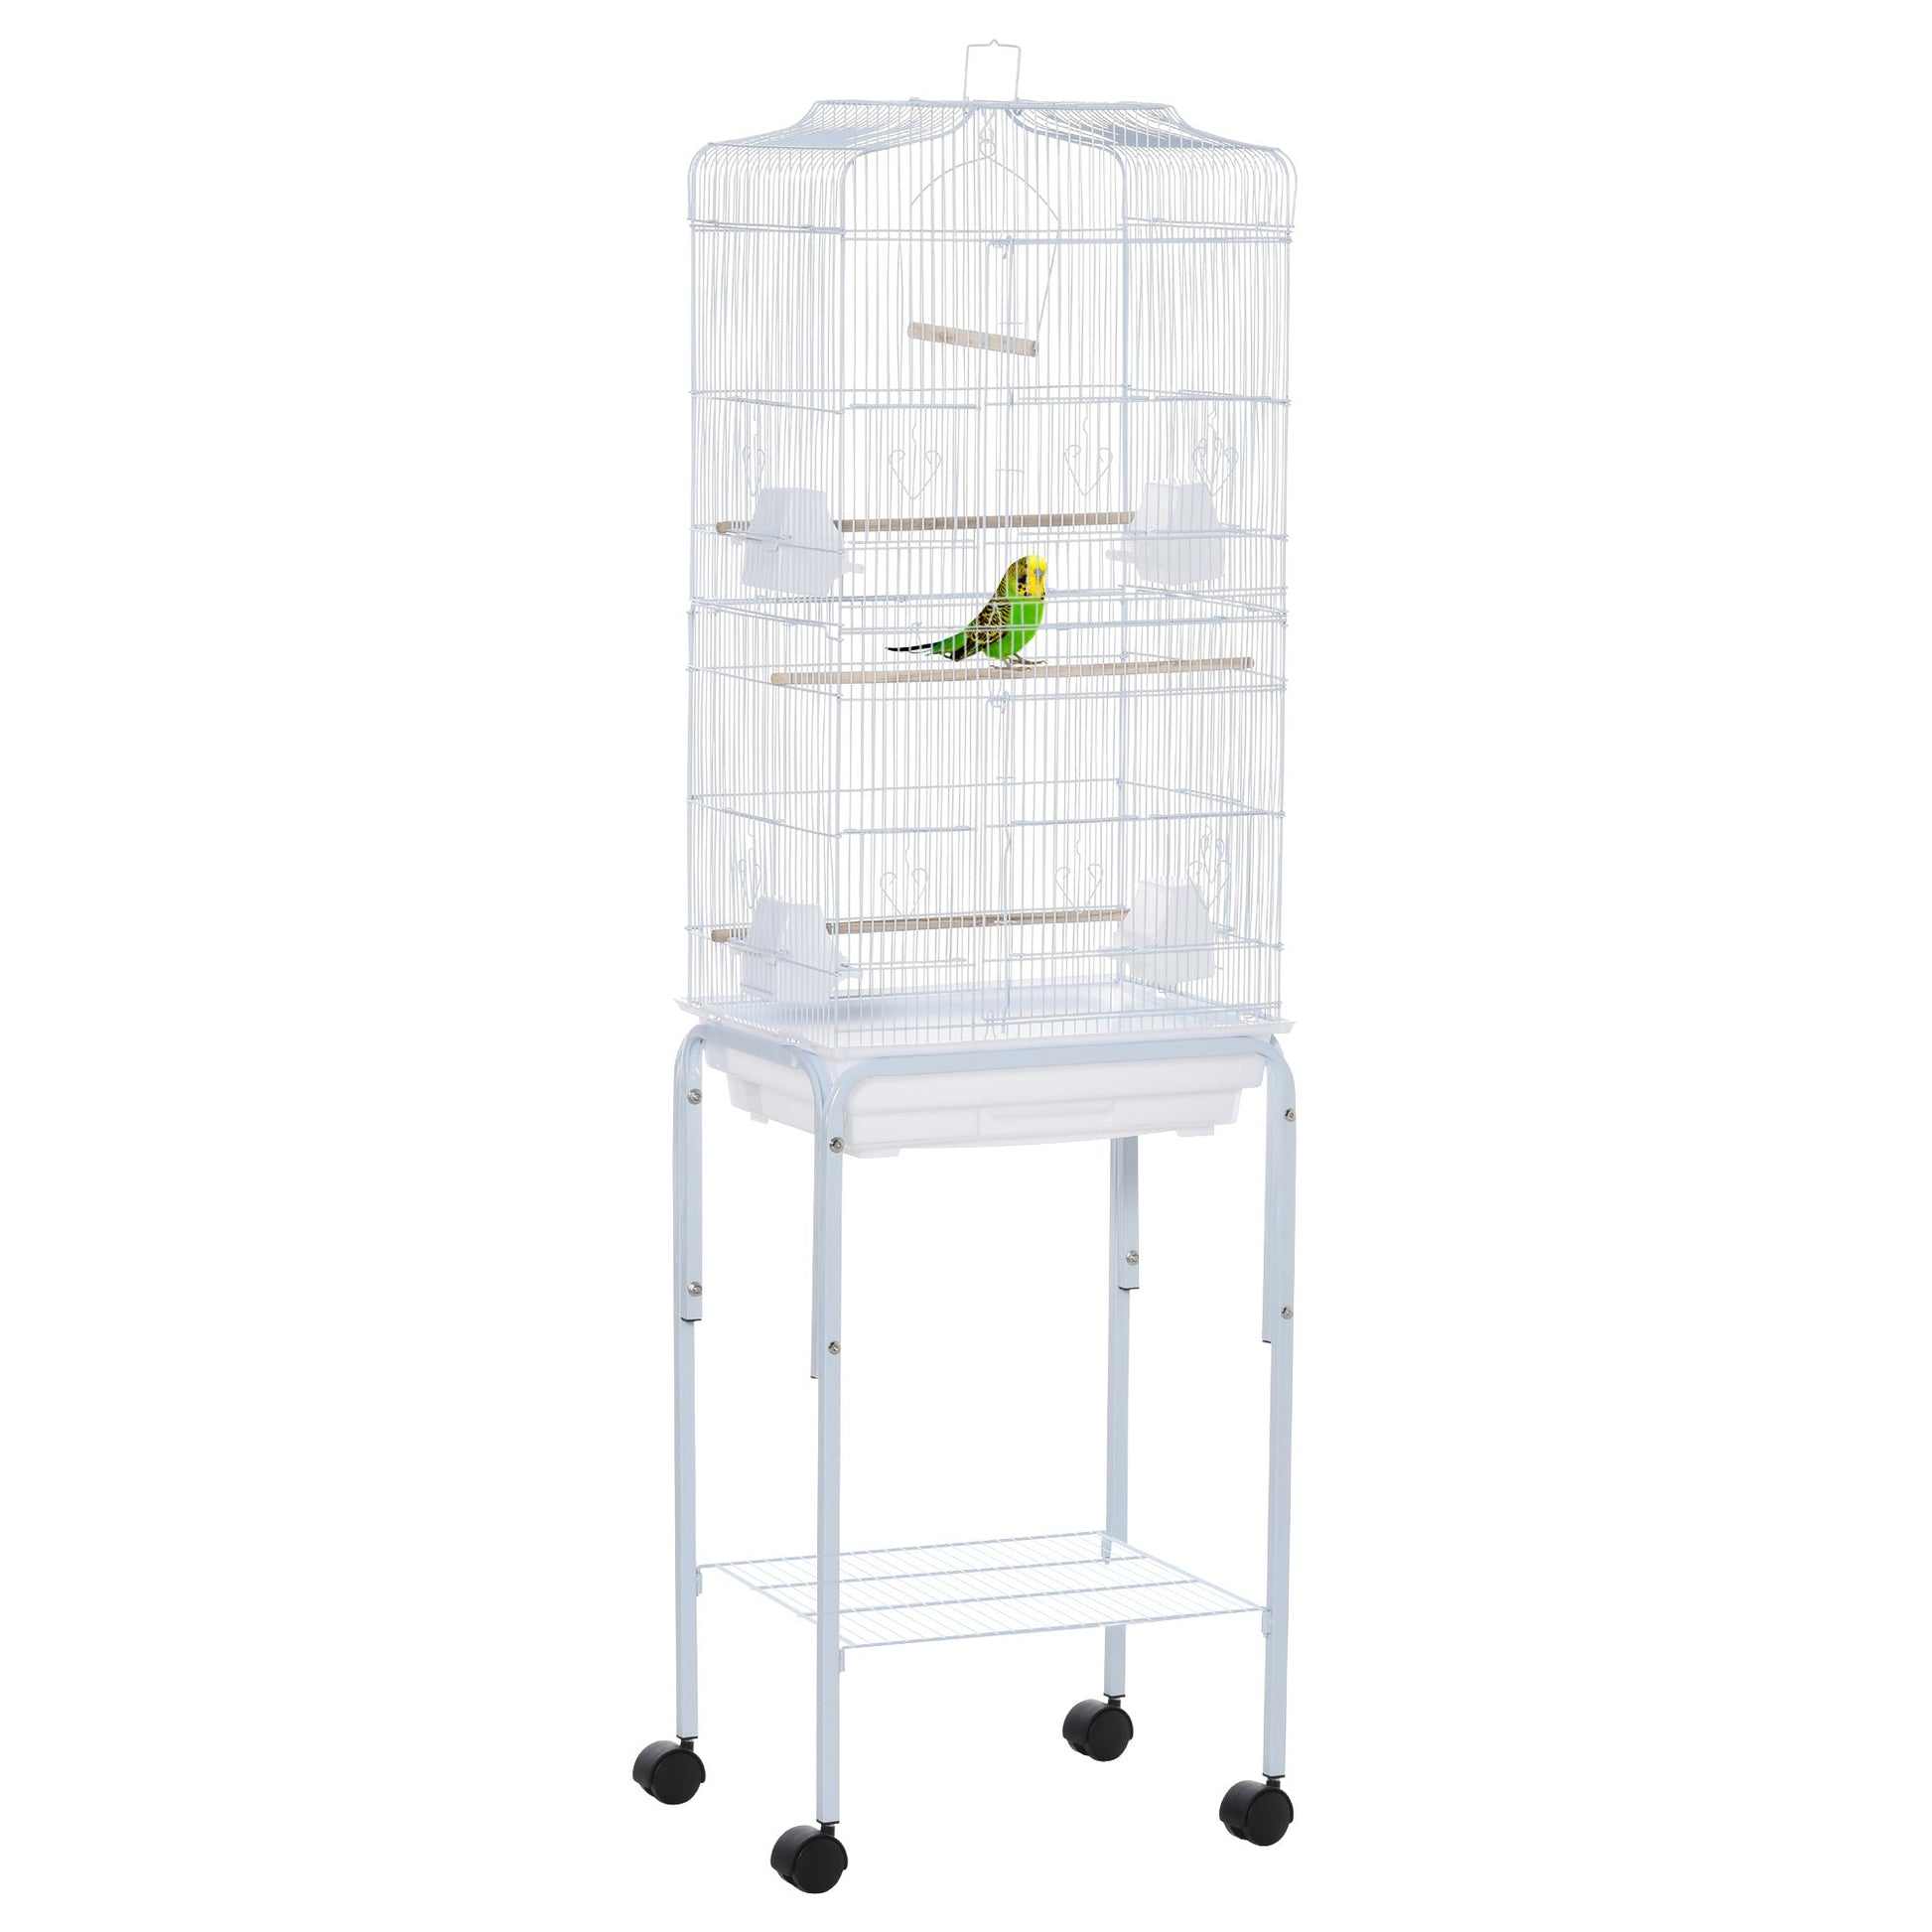 62" Rolling Bird Cage Cockatoo House Play Top Finch Pet Supply with Storage Shelf, Wheels - White at Gallery Canada